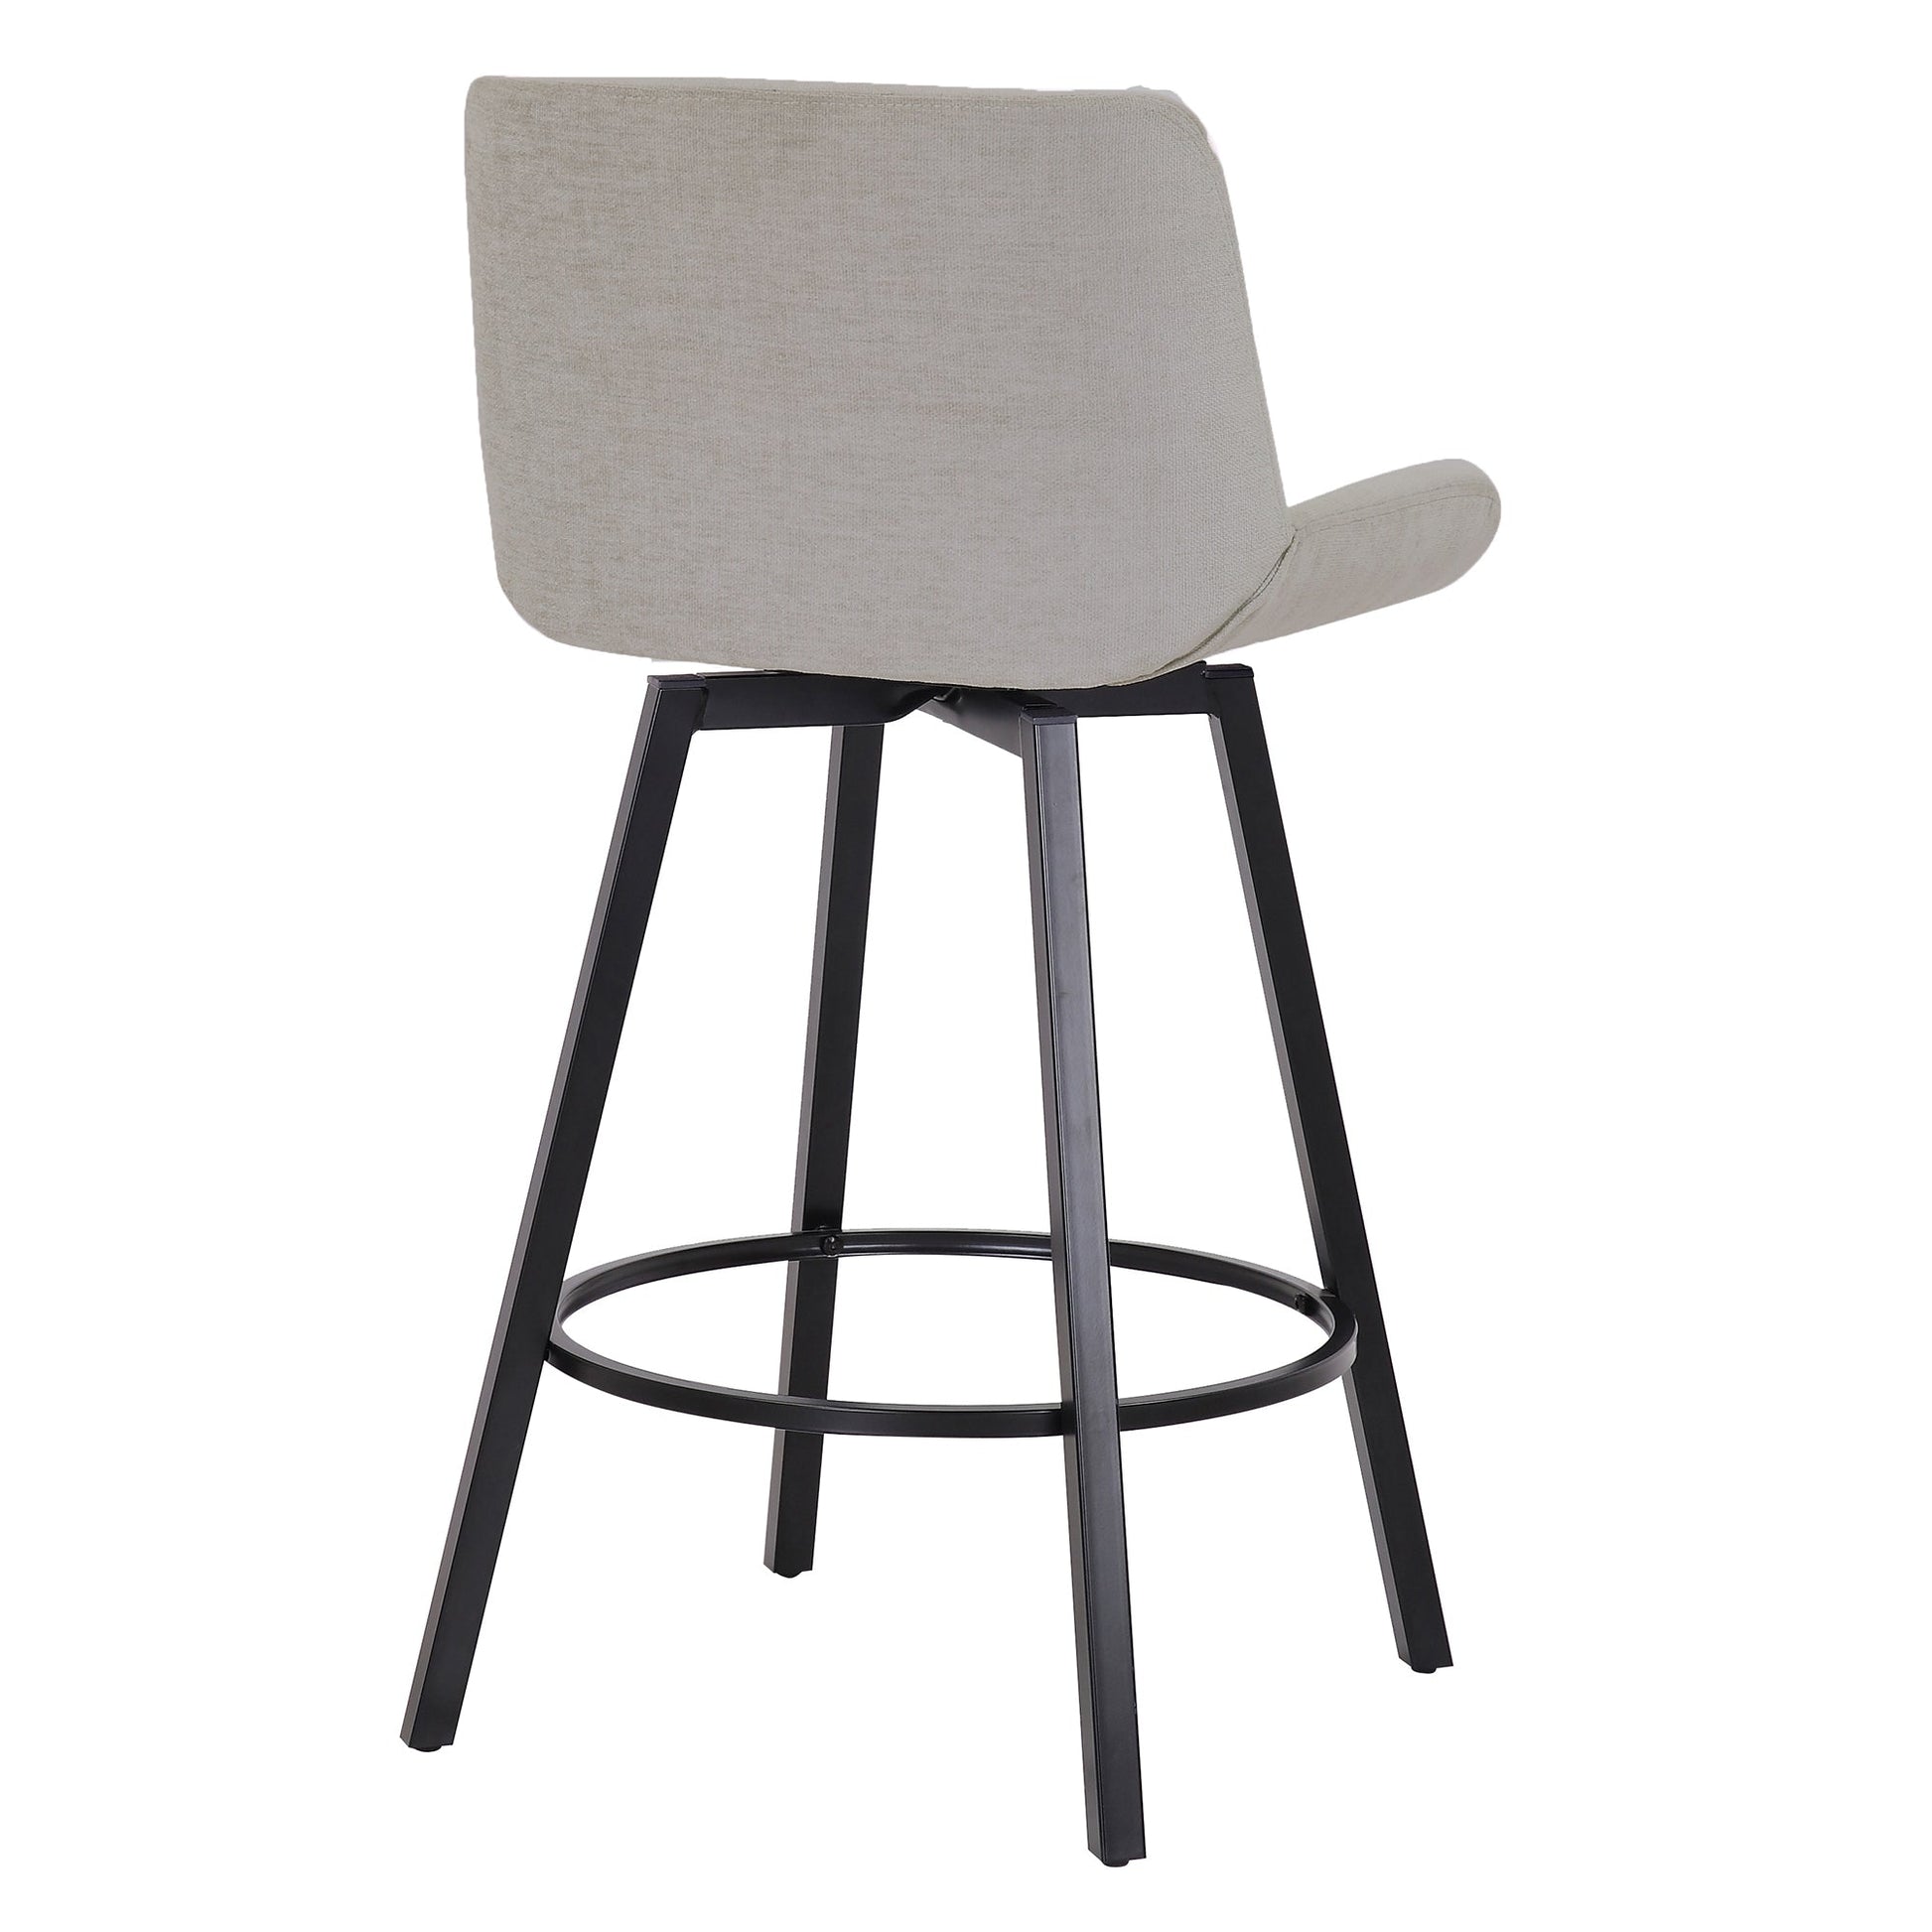 26" Counter Stool | Set of 2 | Fern Grey and Black - Your Bar Stools Canada